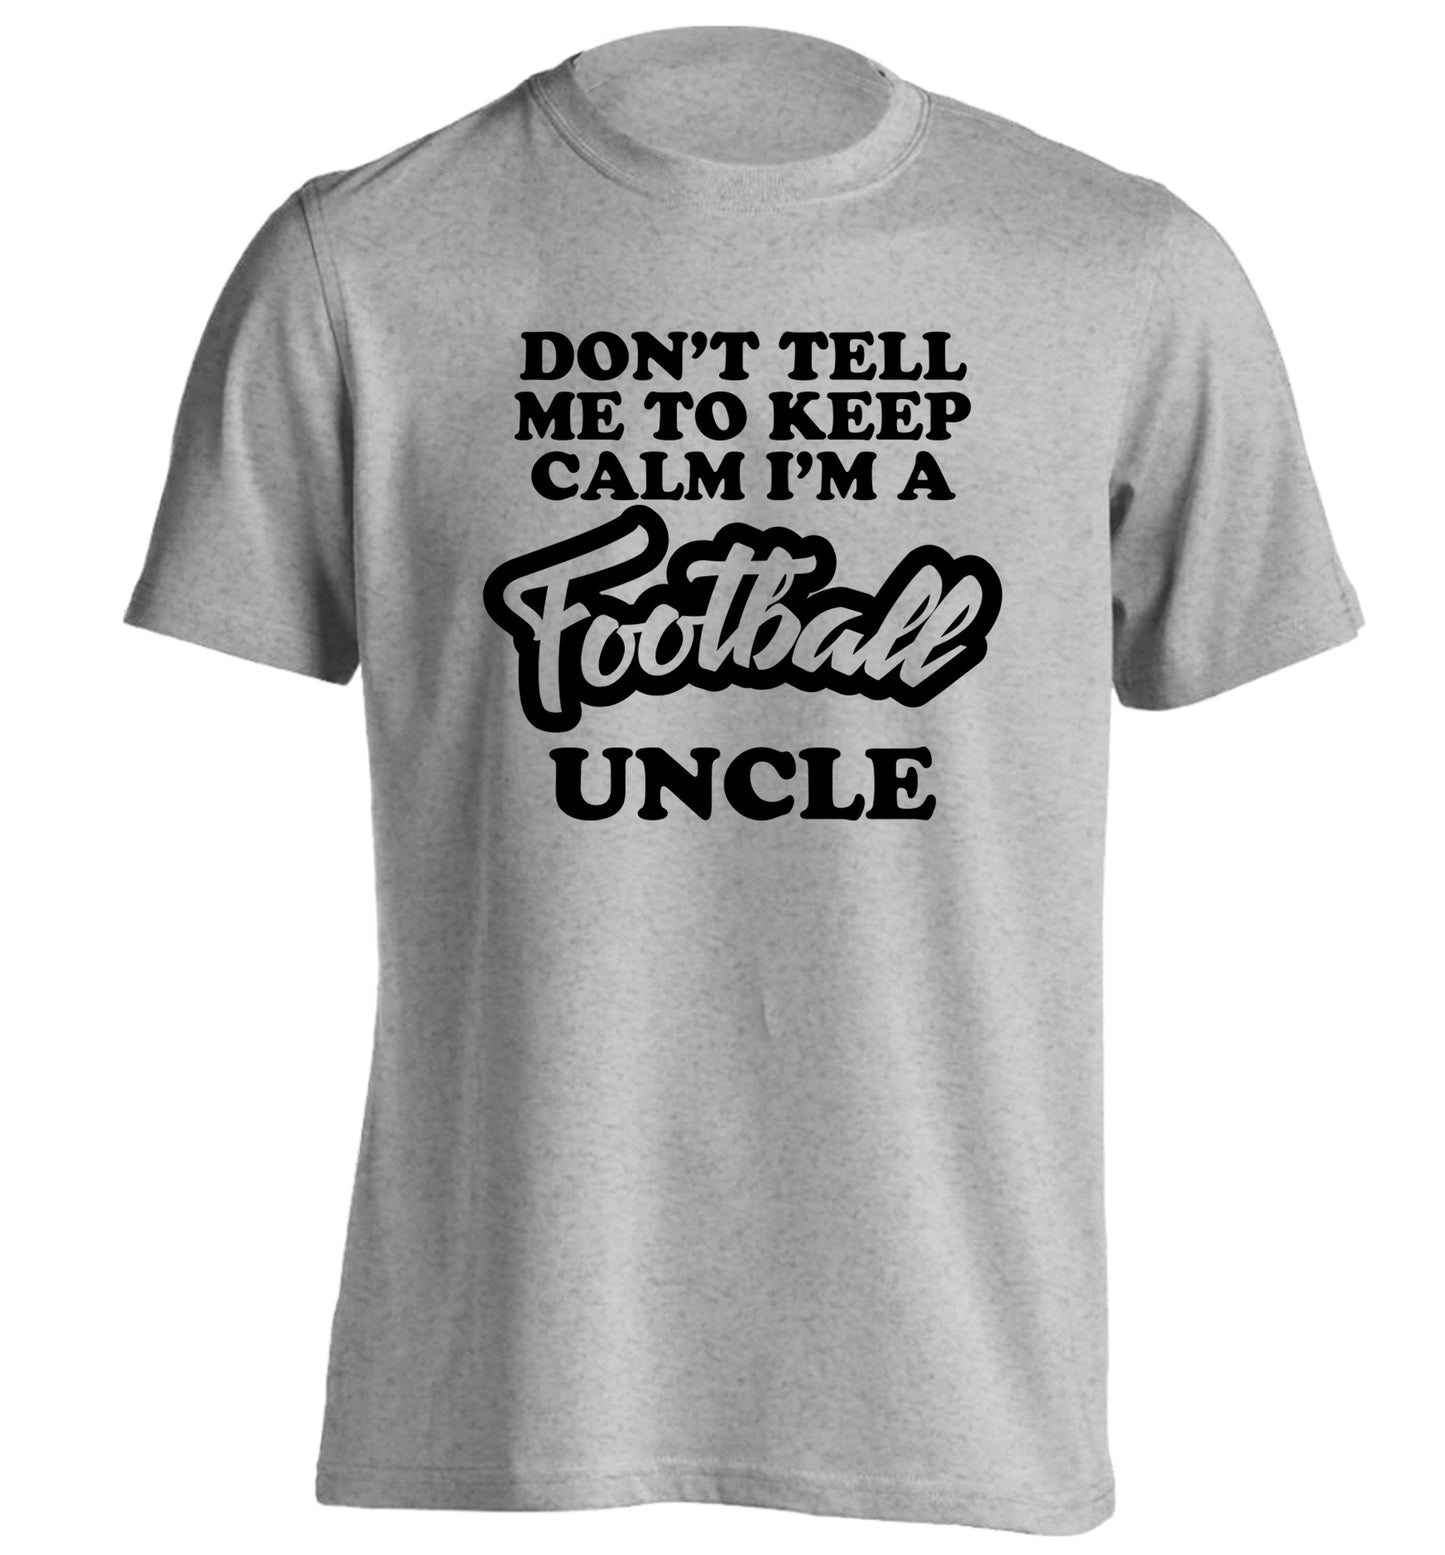 Don't tell me to keep calm I'm a football uncle adults unisexgrey Tshirt 2XL